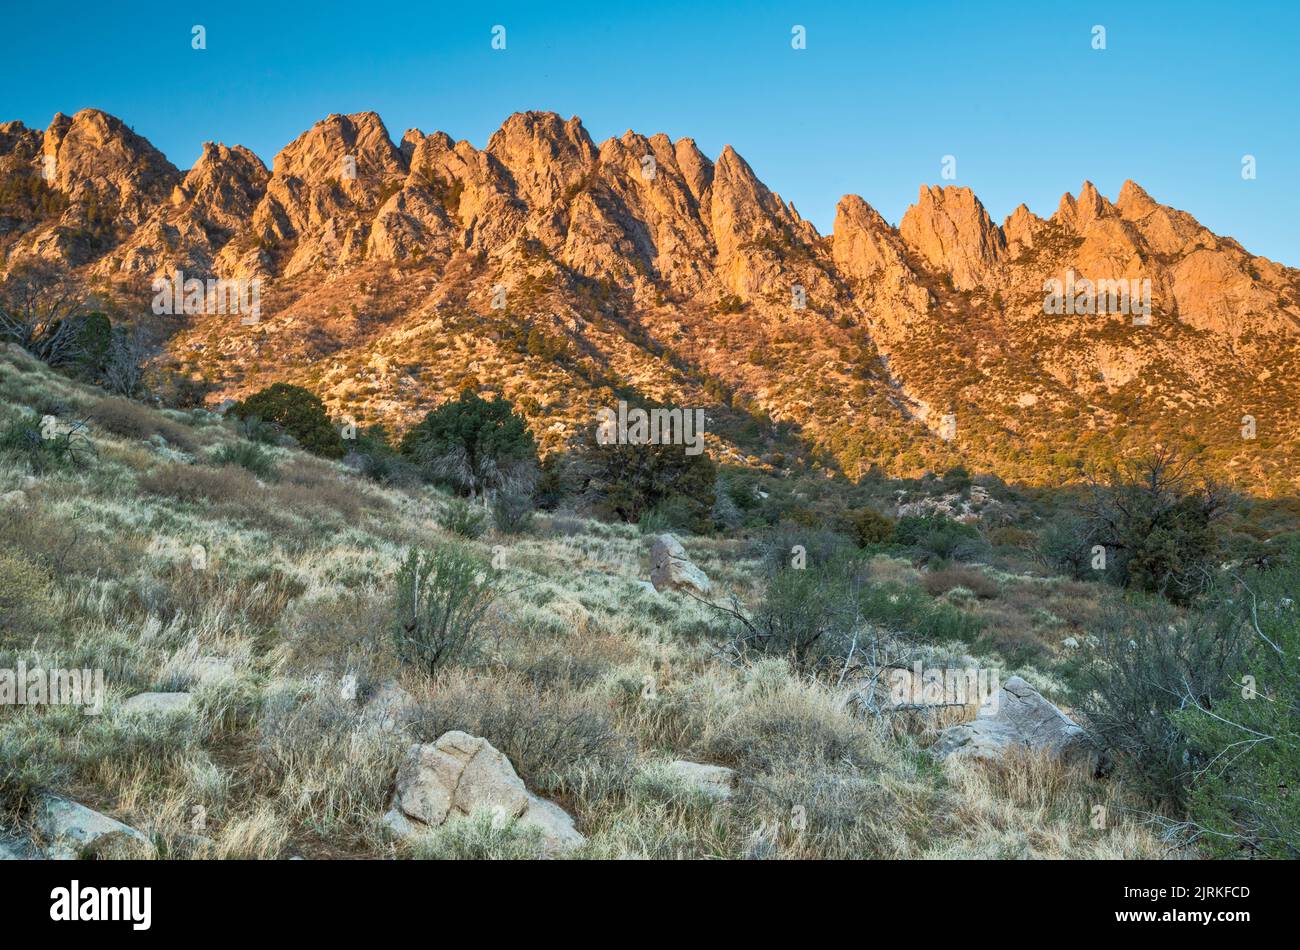 Orgelnadeln bei Sonnenaufgang, Blick vom Pine Tree Trail, Aguirre Spring Recreation Area, Organ Mountains Desert Peaks National Monument, New Mexico, USA Stockfoto